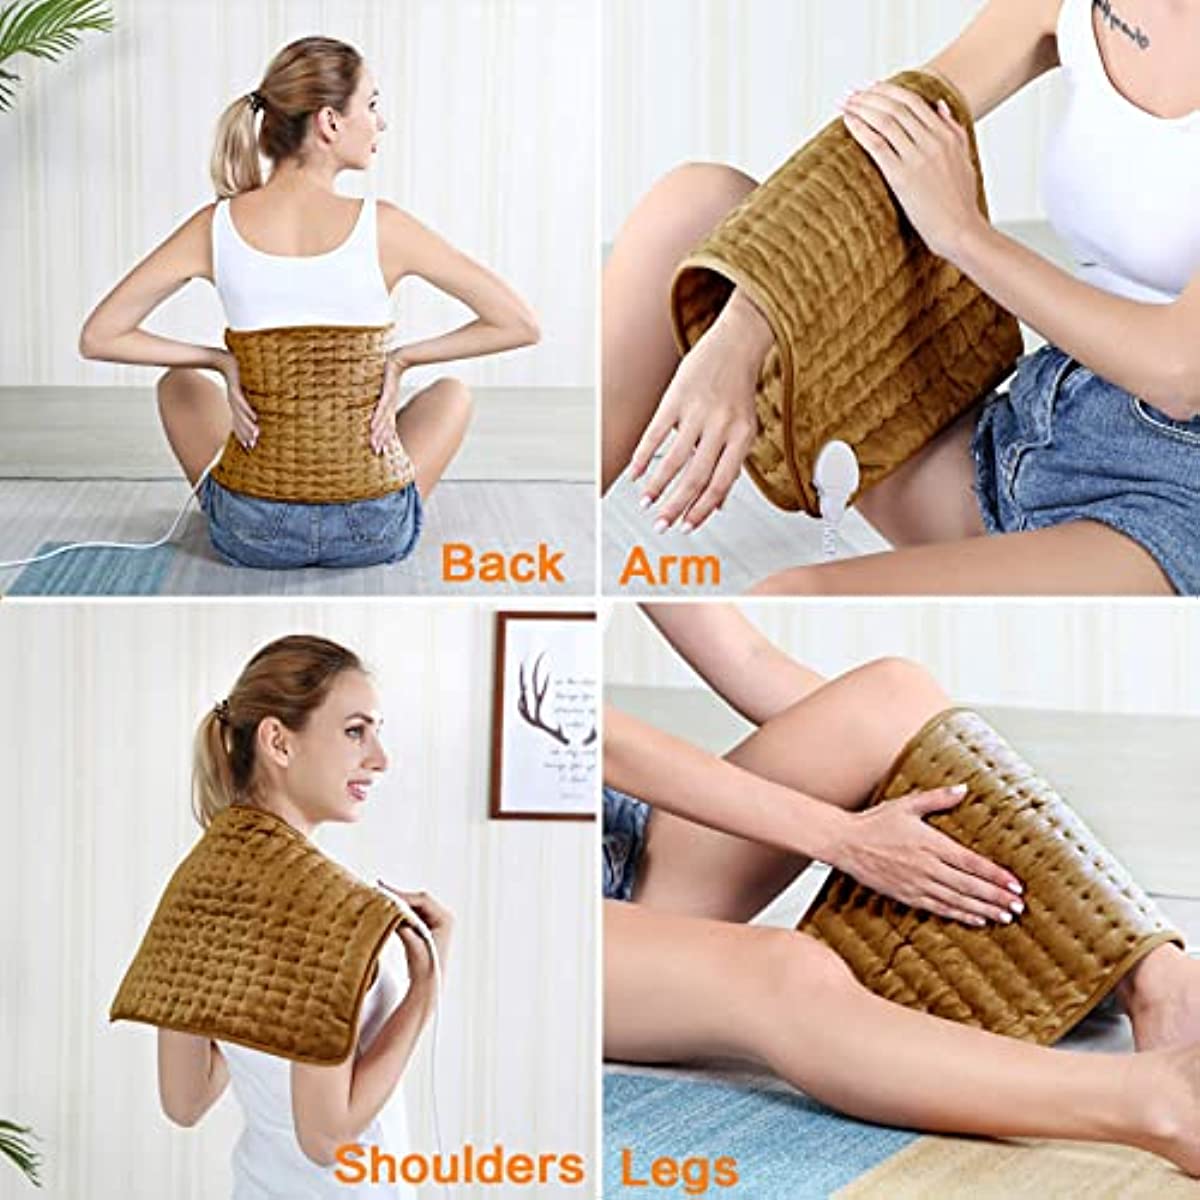 Heating Pad - Electric Heating Pads - Hot Heated Pad for Back Pain Muscle Pain Relieve - Dry & Moist Heat Therapy Option - Auto Shut Off Function (Brown, 12\" x 24\")